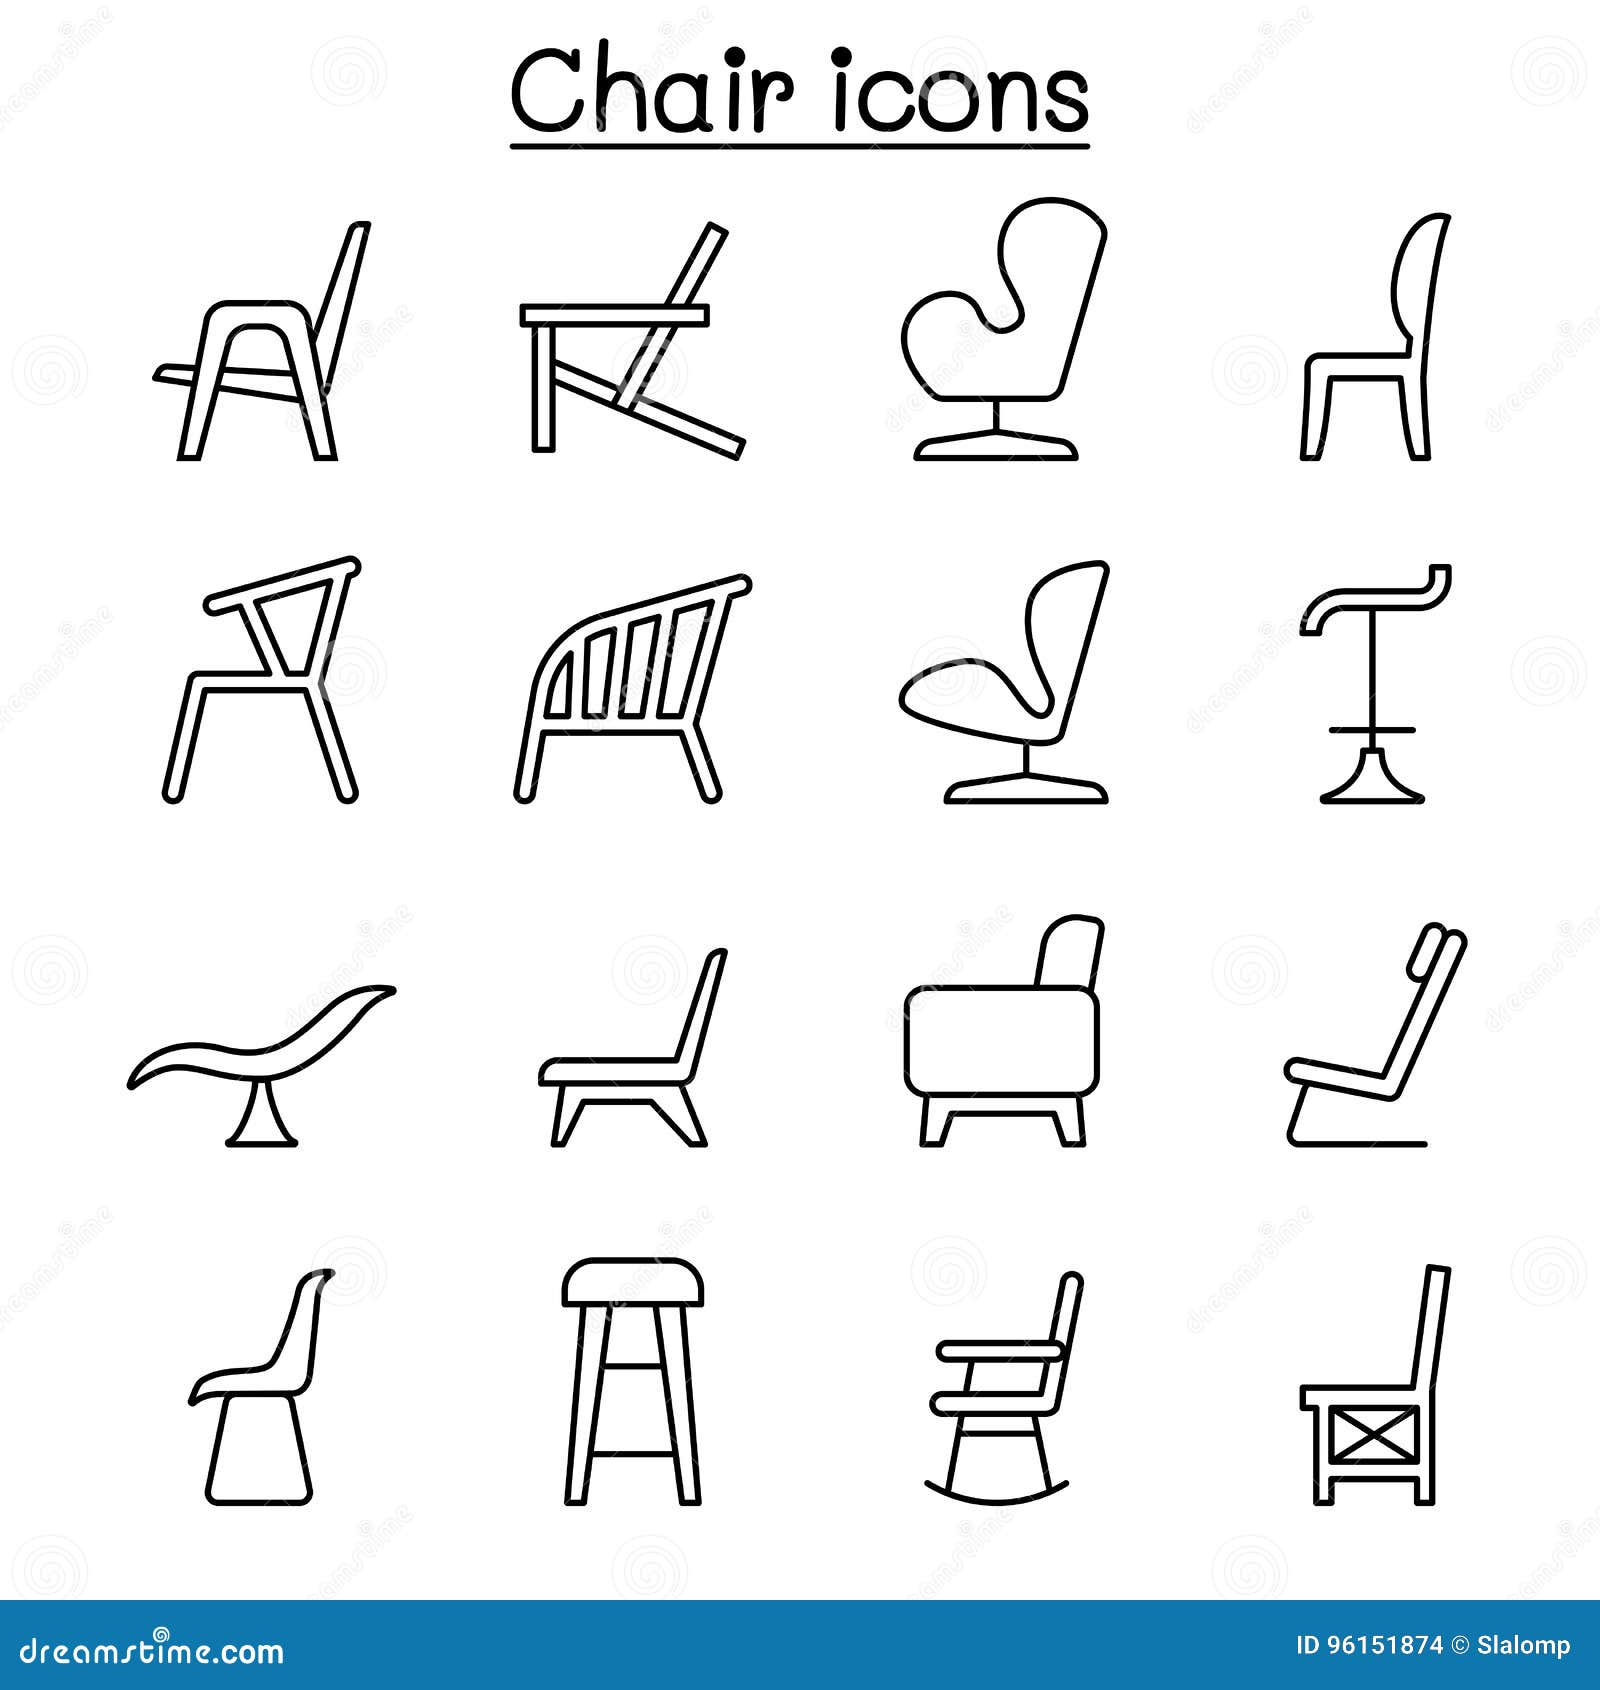 chair icon set in thin line style